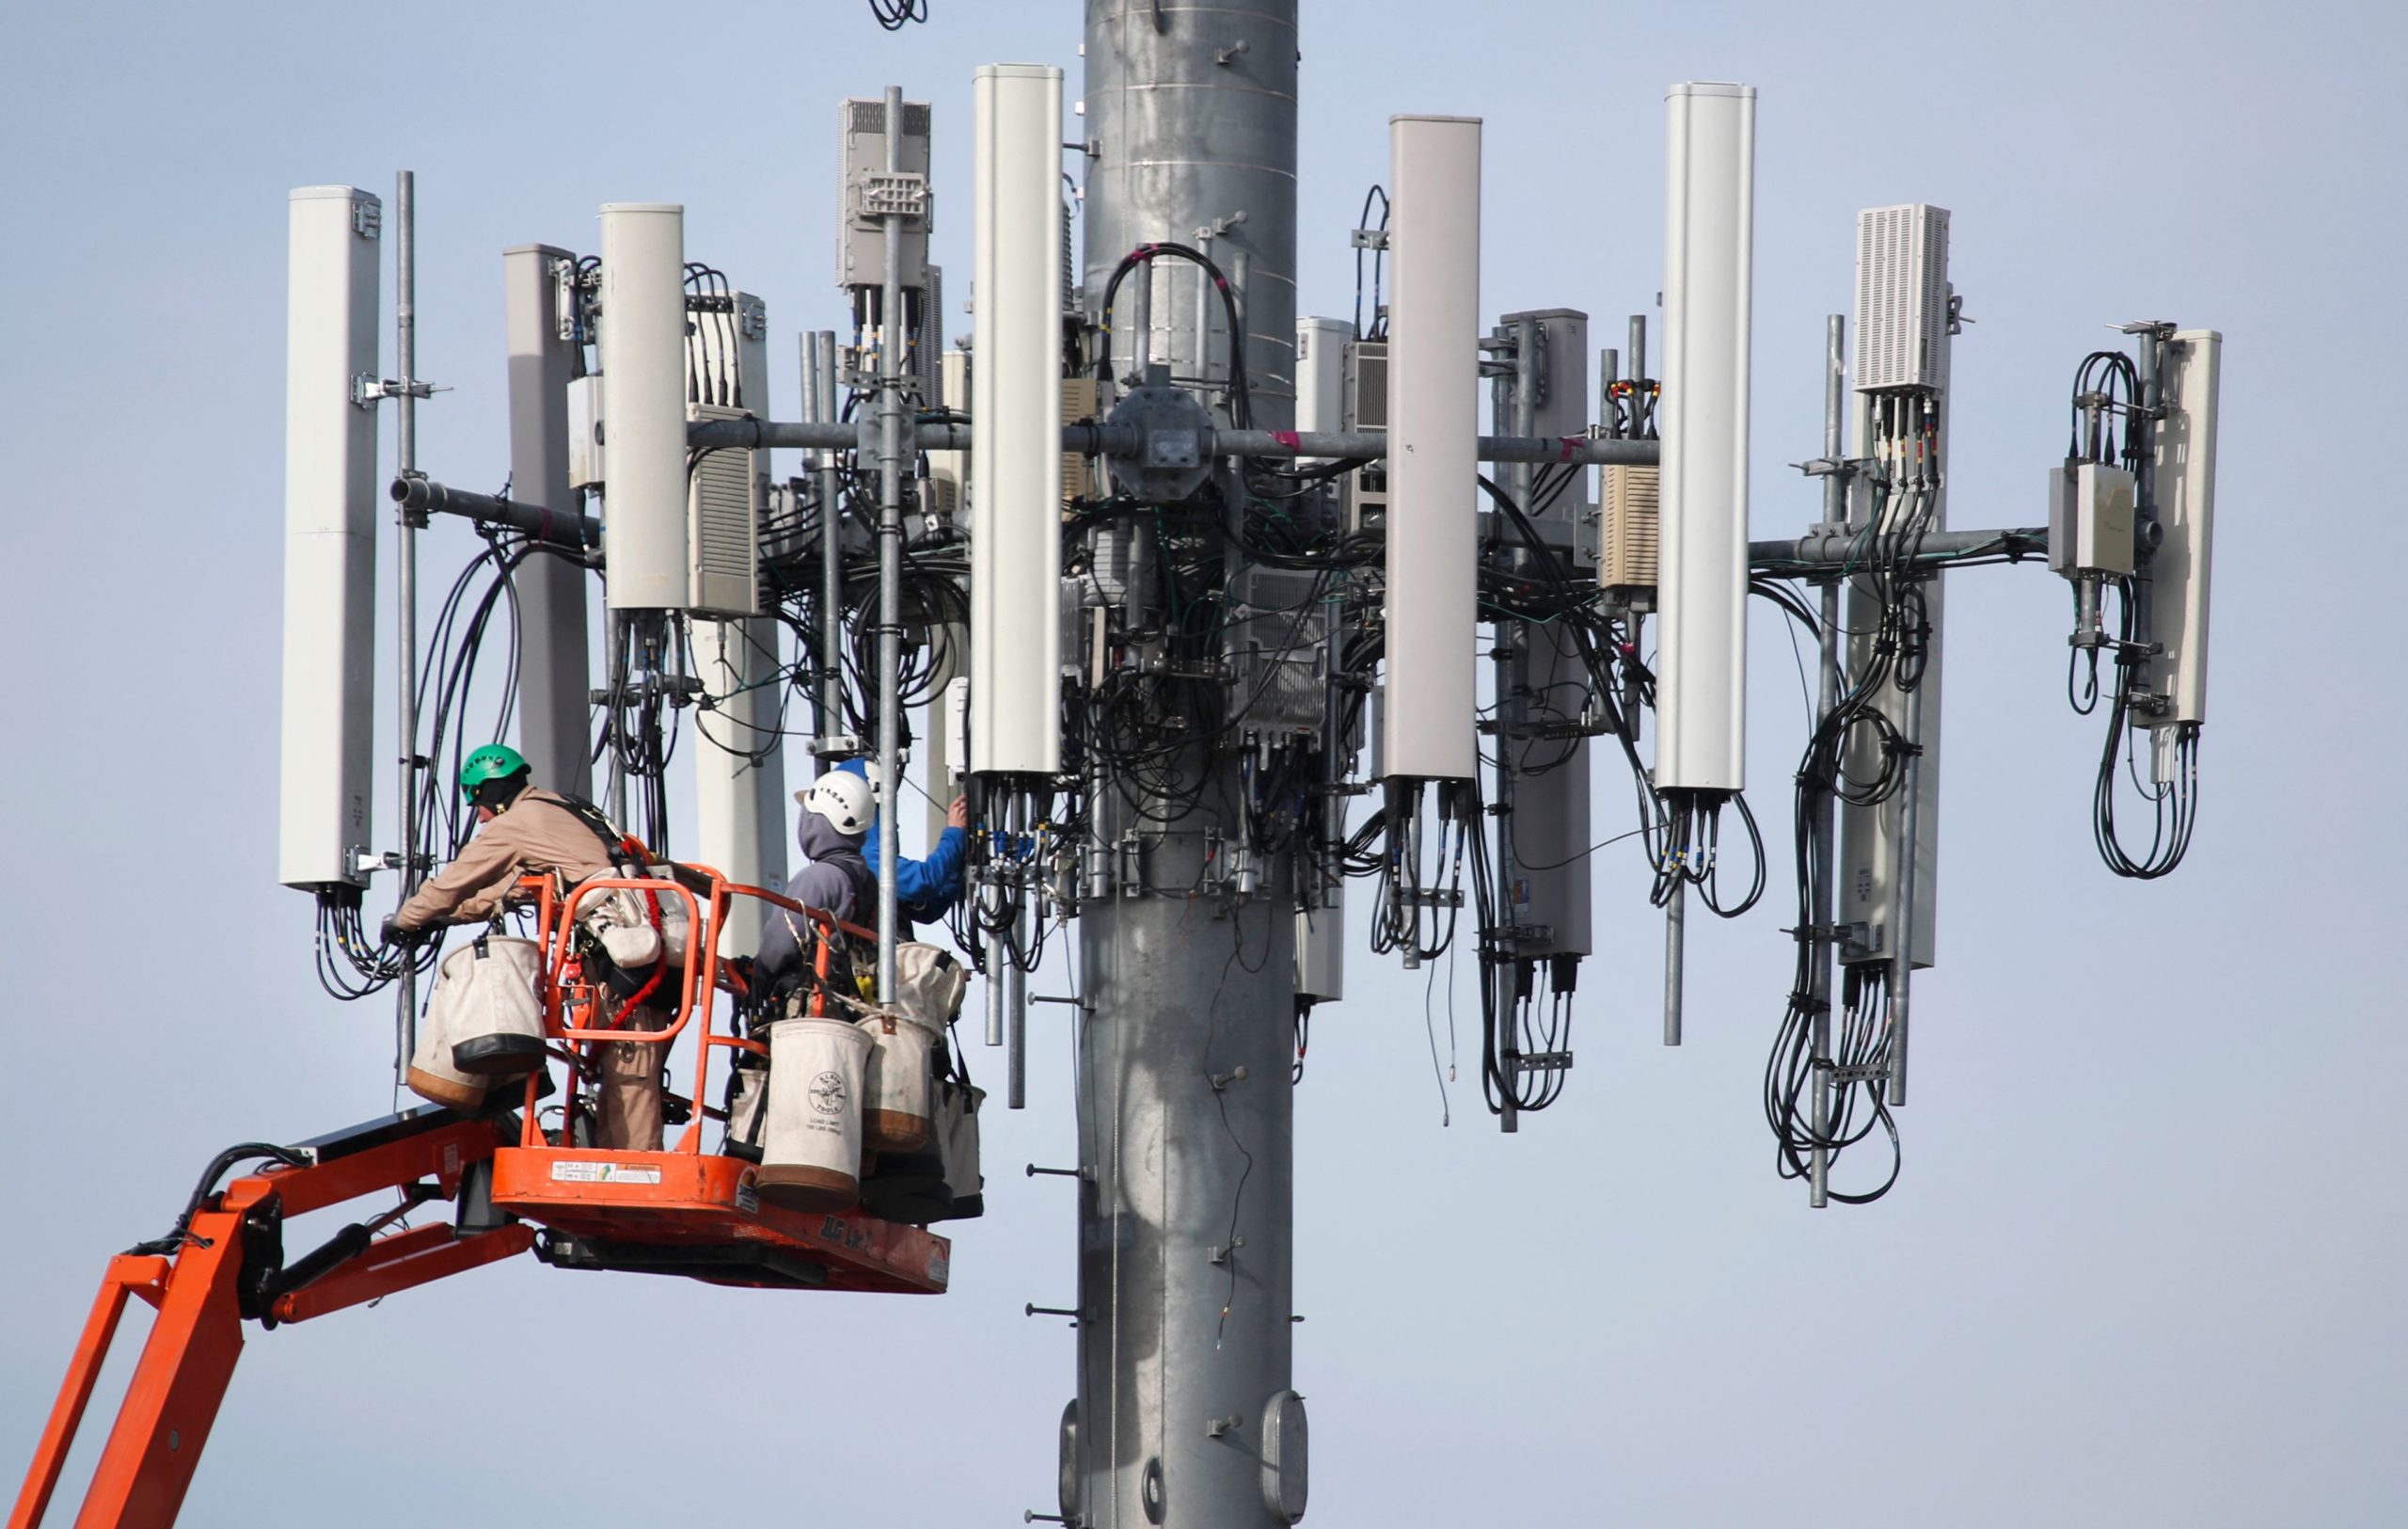 A contract crew for Verizon, works on a cell tower to update it to handle the new 5G network in Orem, Utah on December 10, 2019. (Photo by GEORGE FREY/AFP via Getty Images)